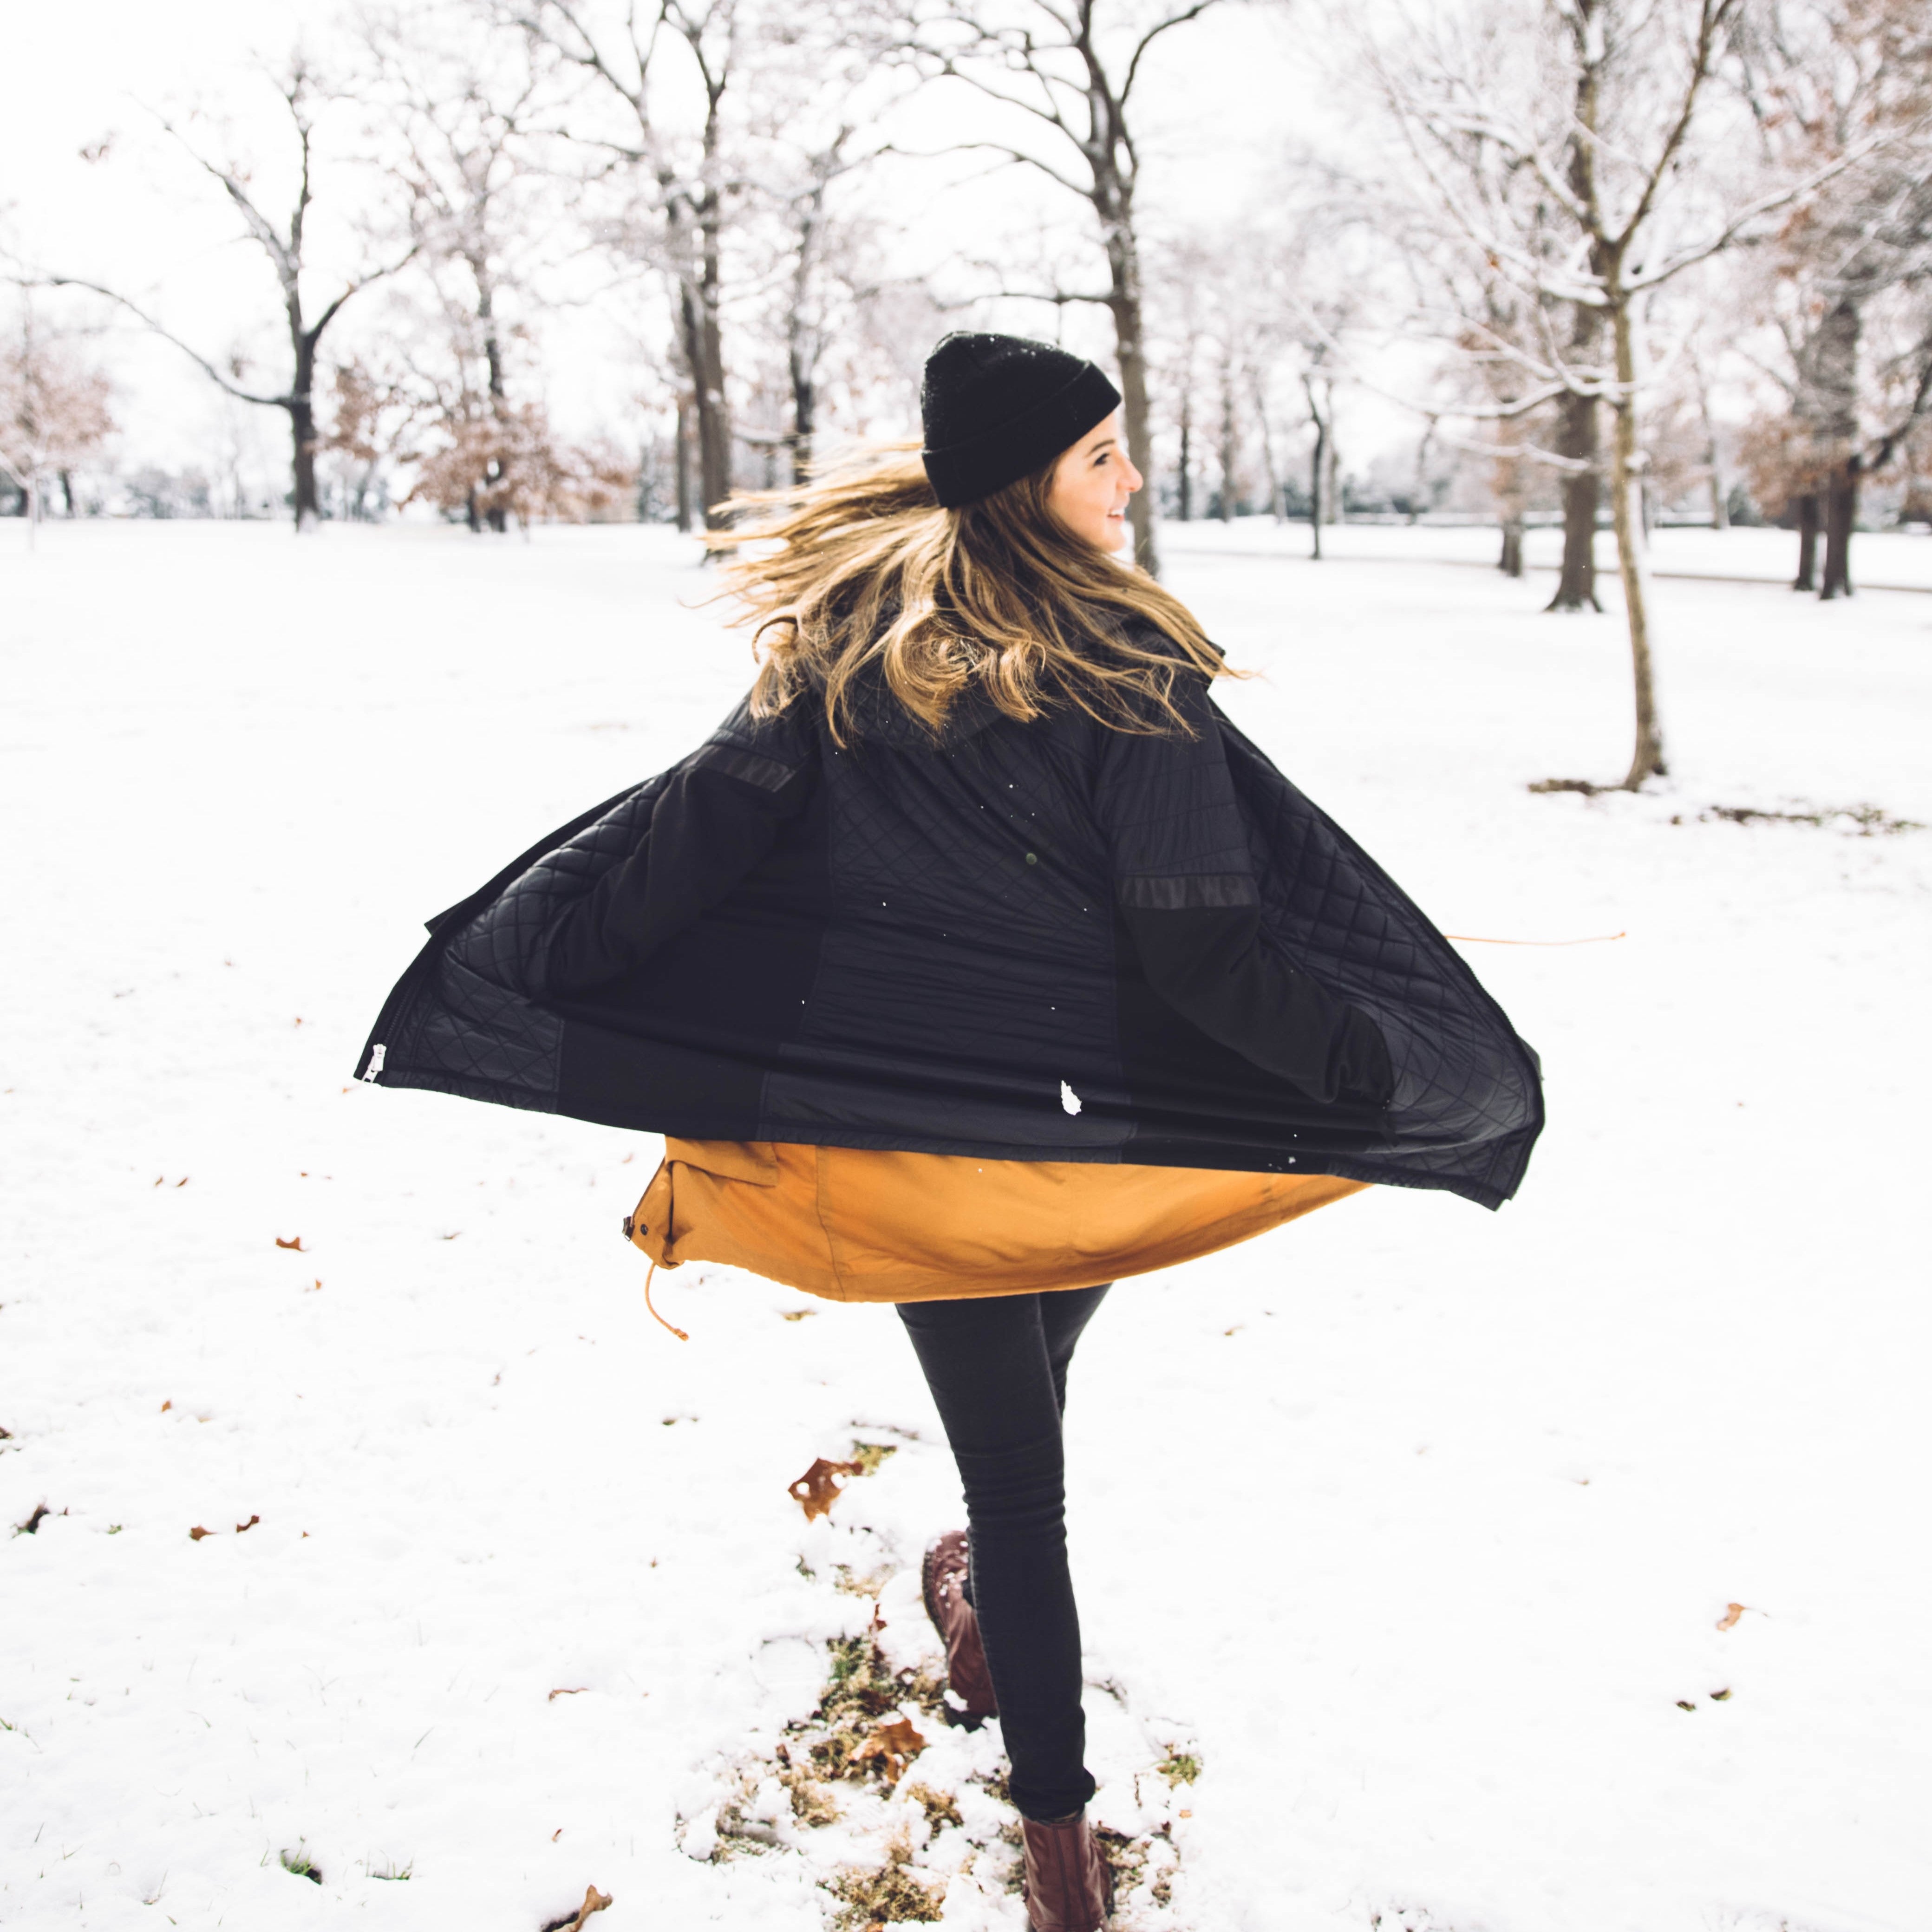 Woman outdoors in winter snow